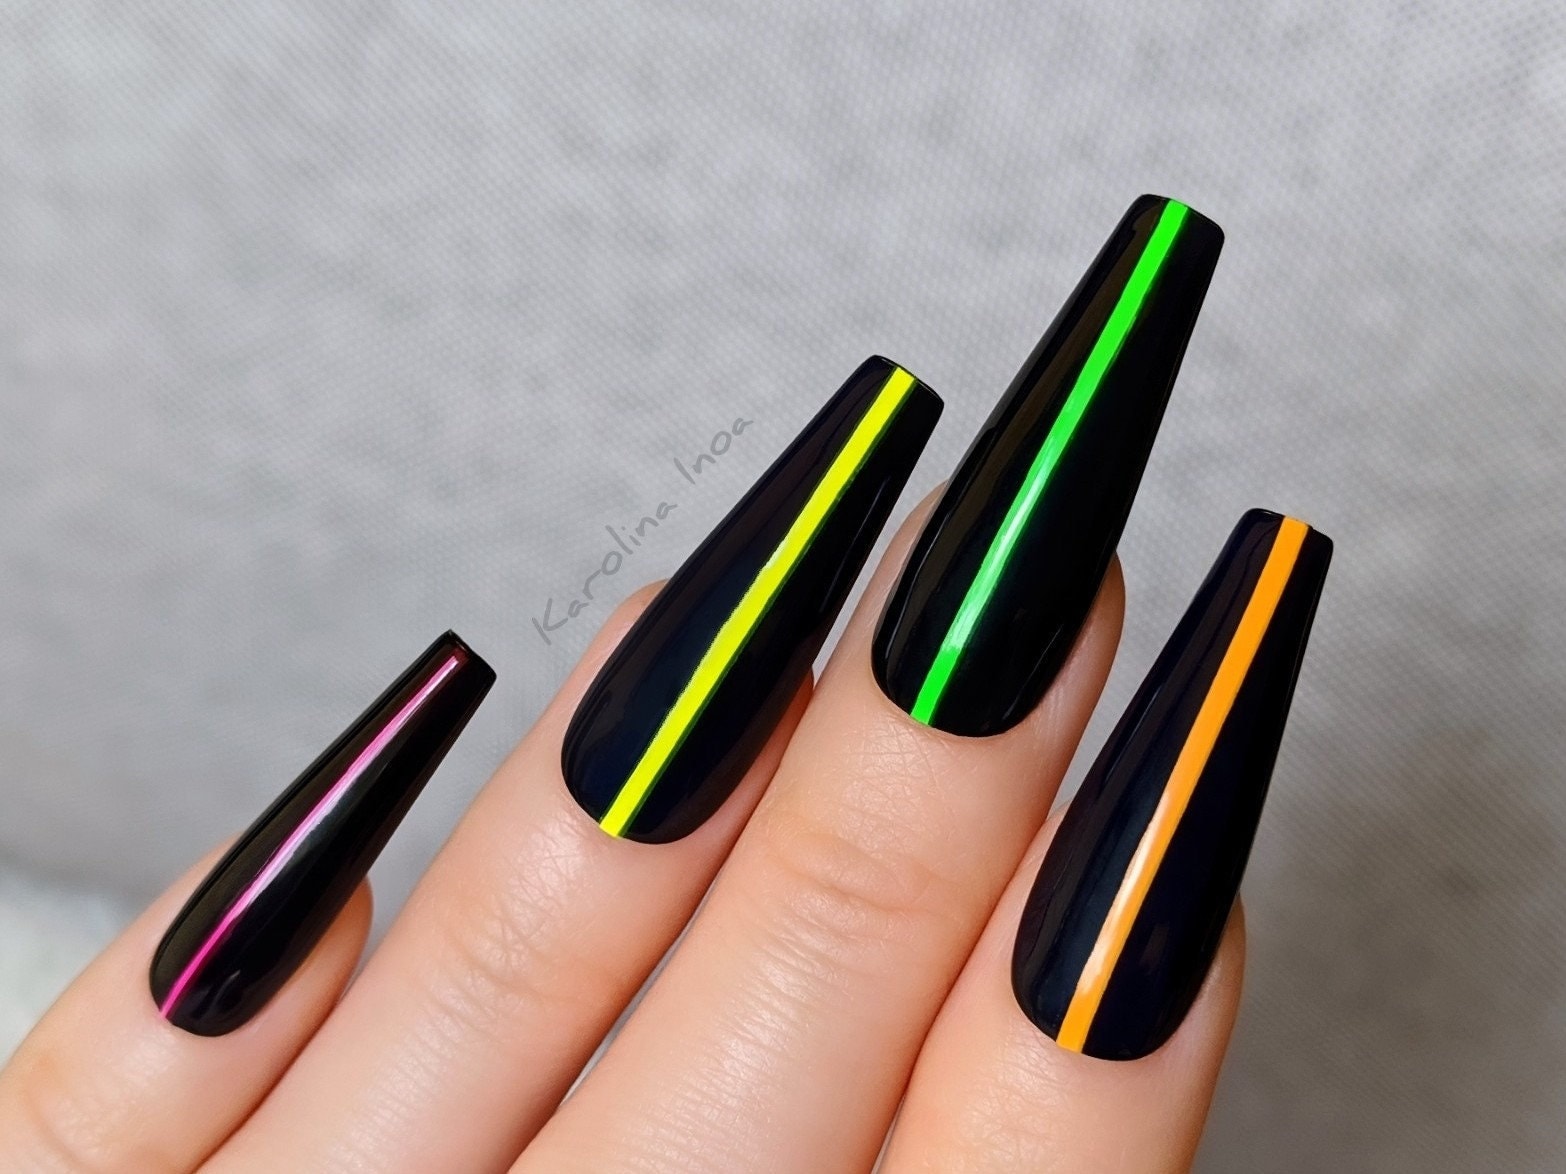 Medium Press on Nails Coffin Fake Nails with Black Stripe Rhinestones  Designs Full Cover Gold Glitter Acrylic Nails Matte Artificial Nails Summer